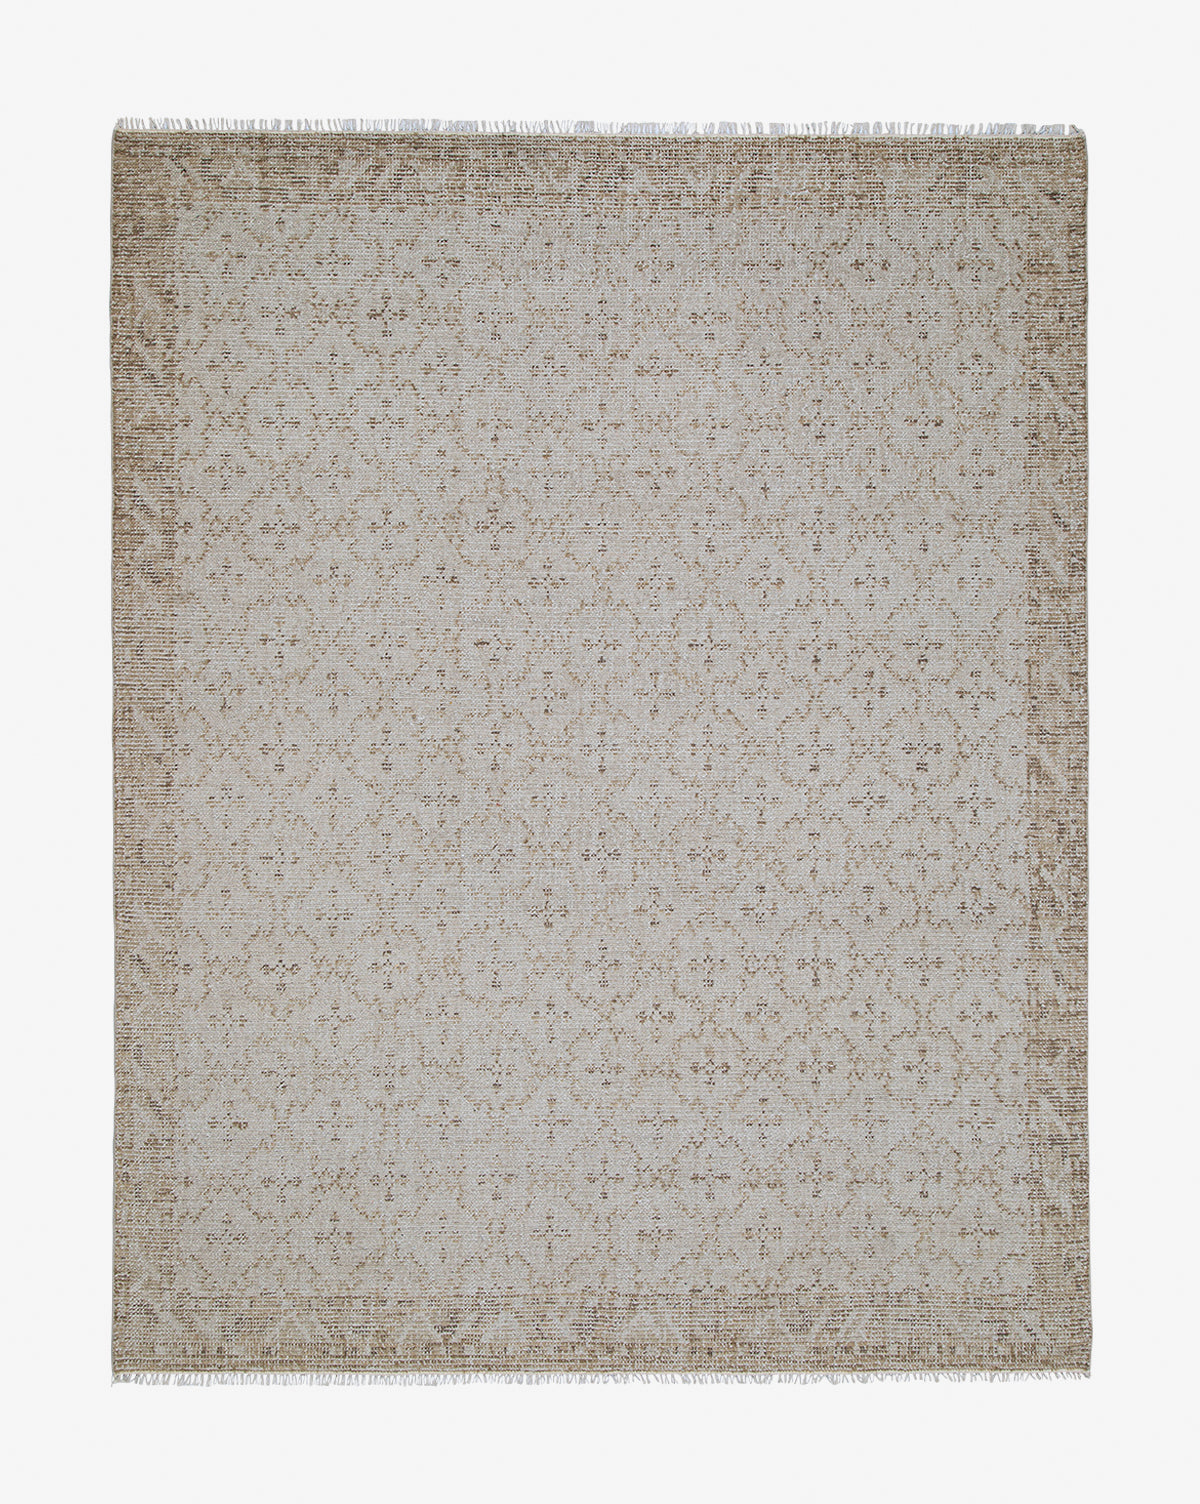 Obeetee, Mali Hand-Knotted Rug Swatch